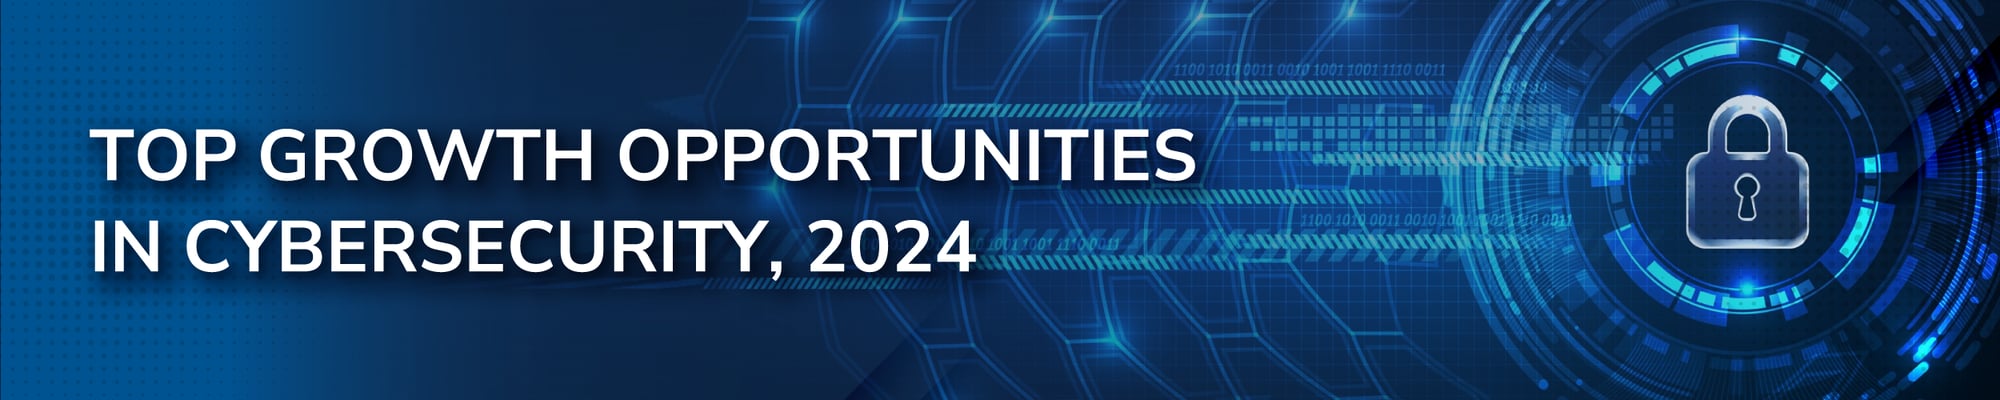 Top Growth Opportunities in Cybersecurity, 2024